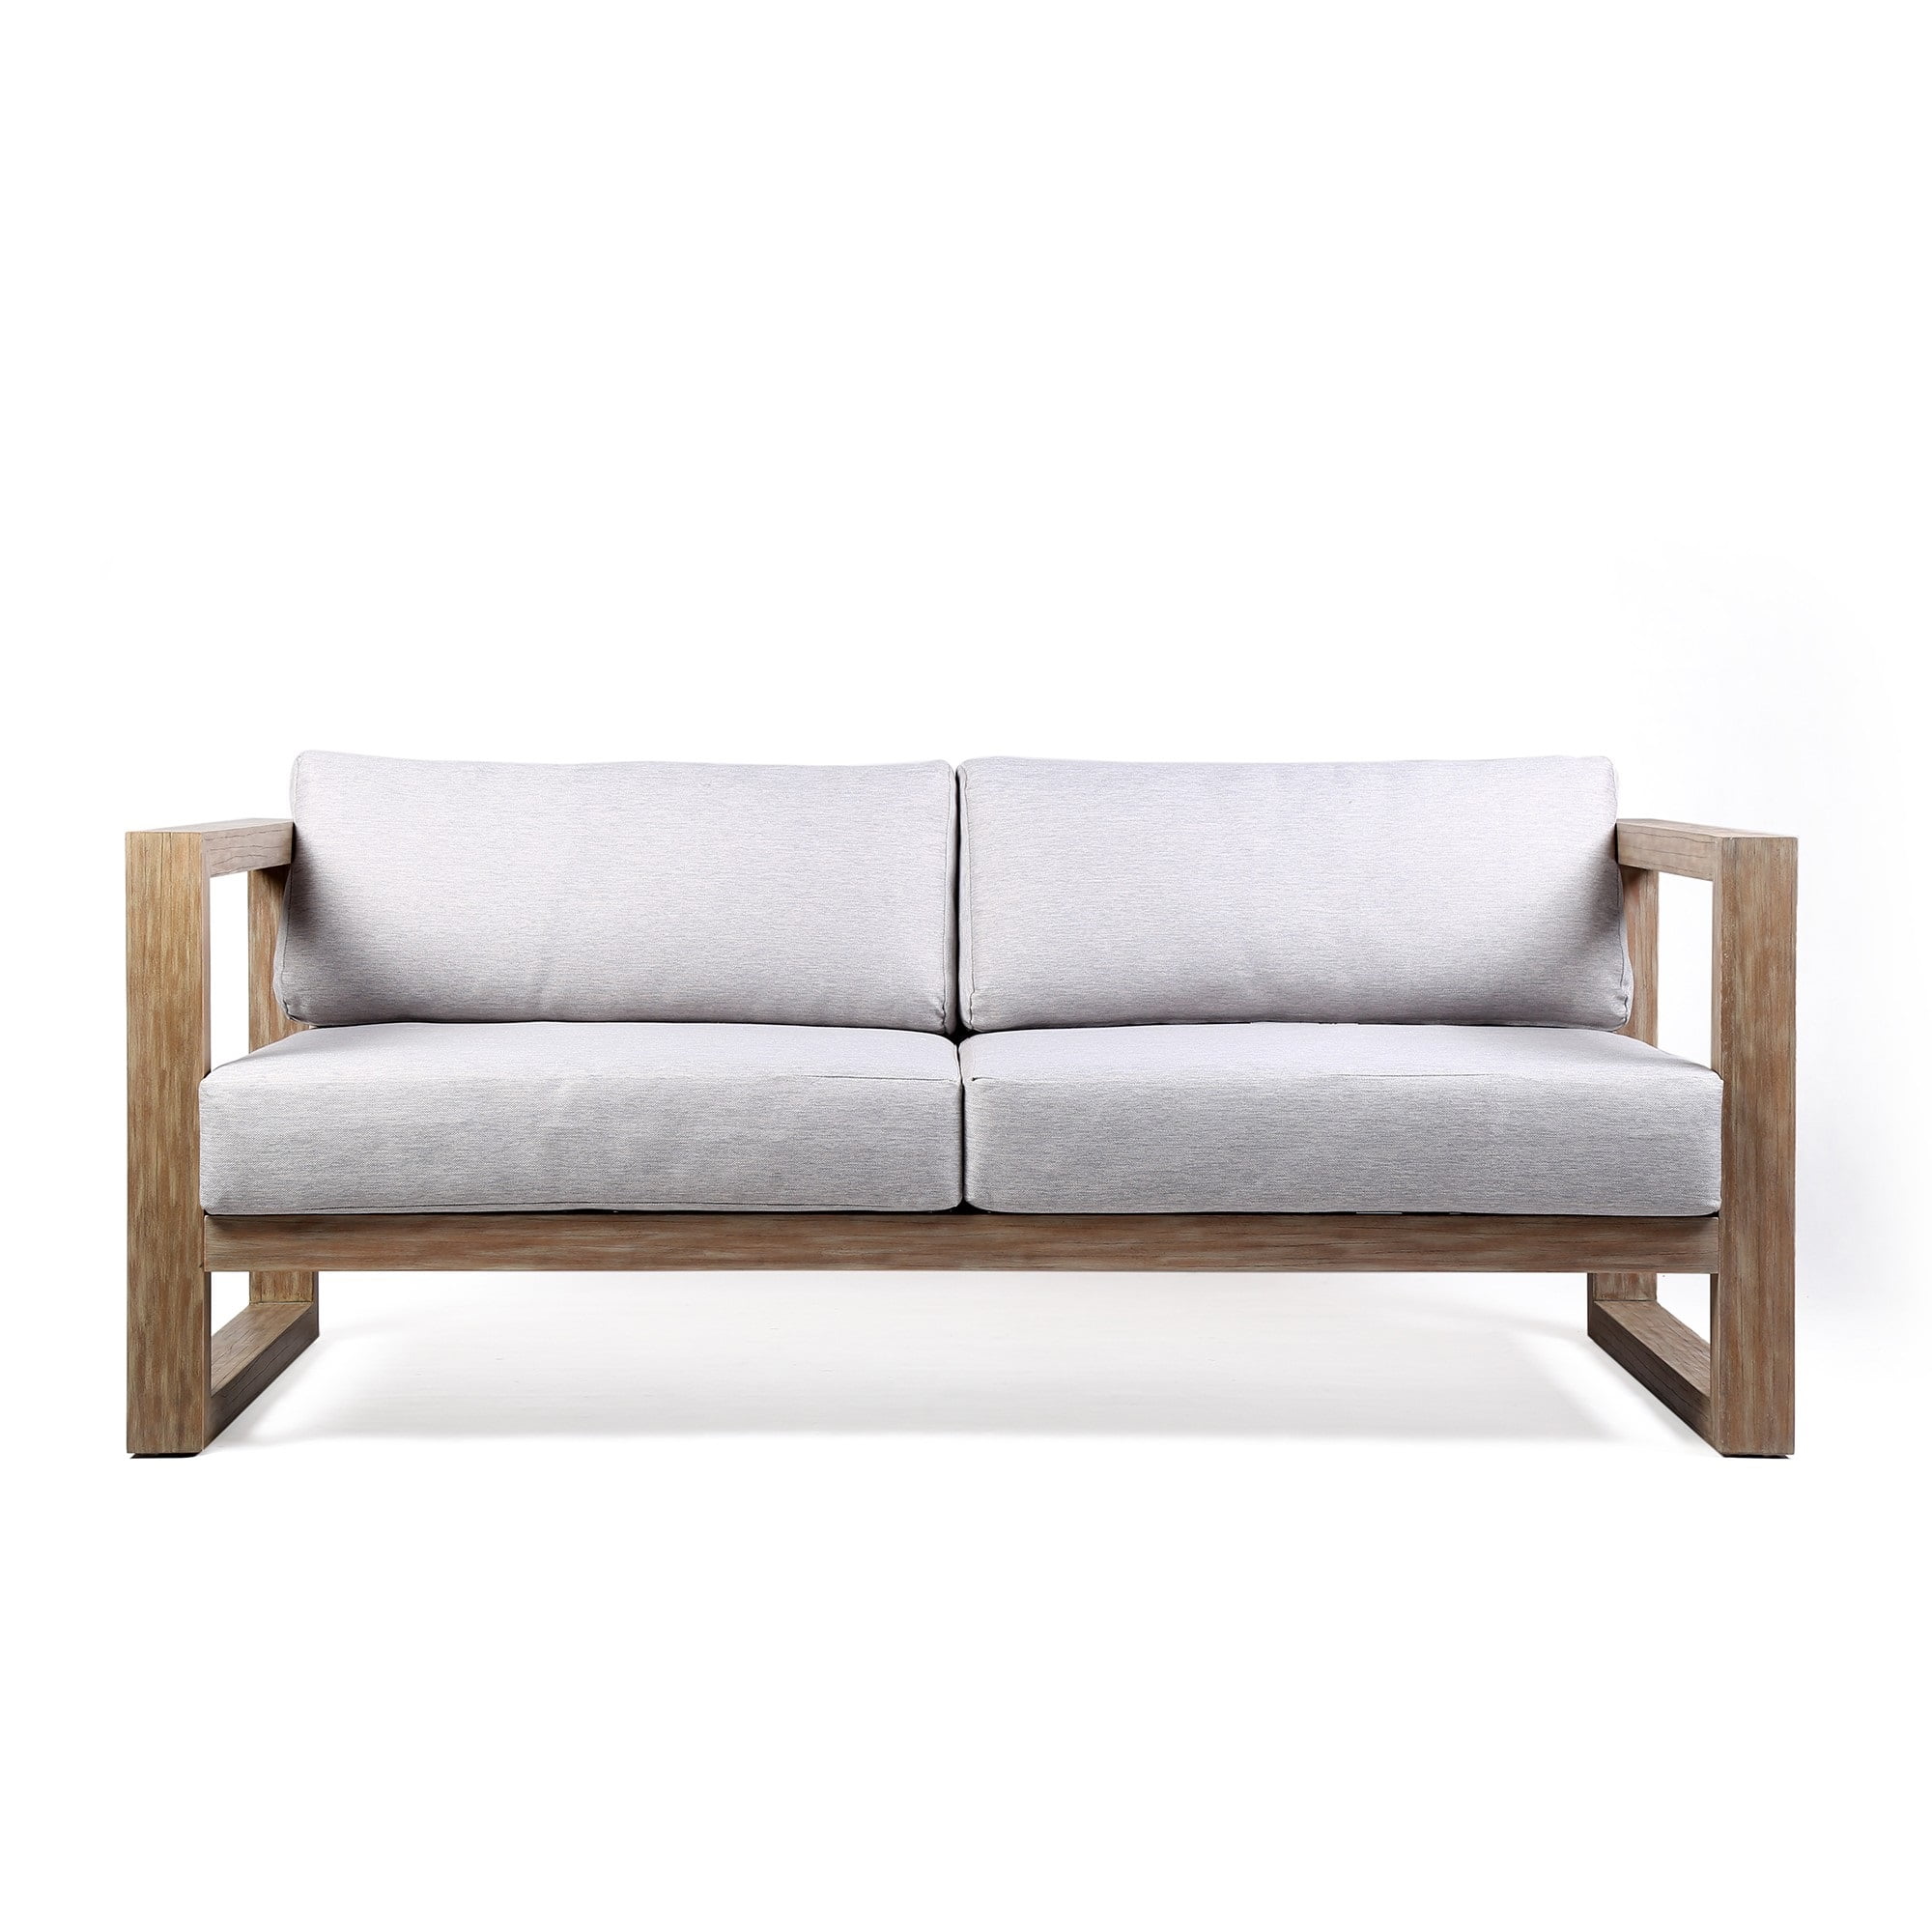 Wooden Frame Outdoor Sofa With Uv